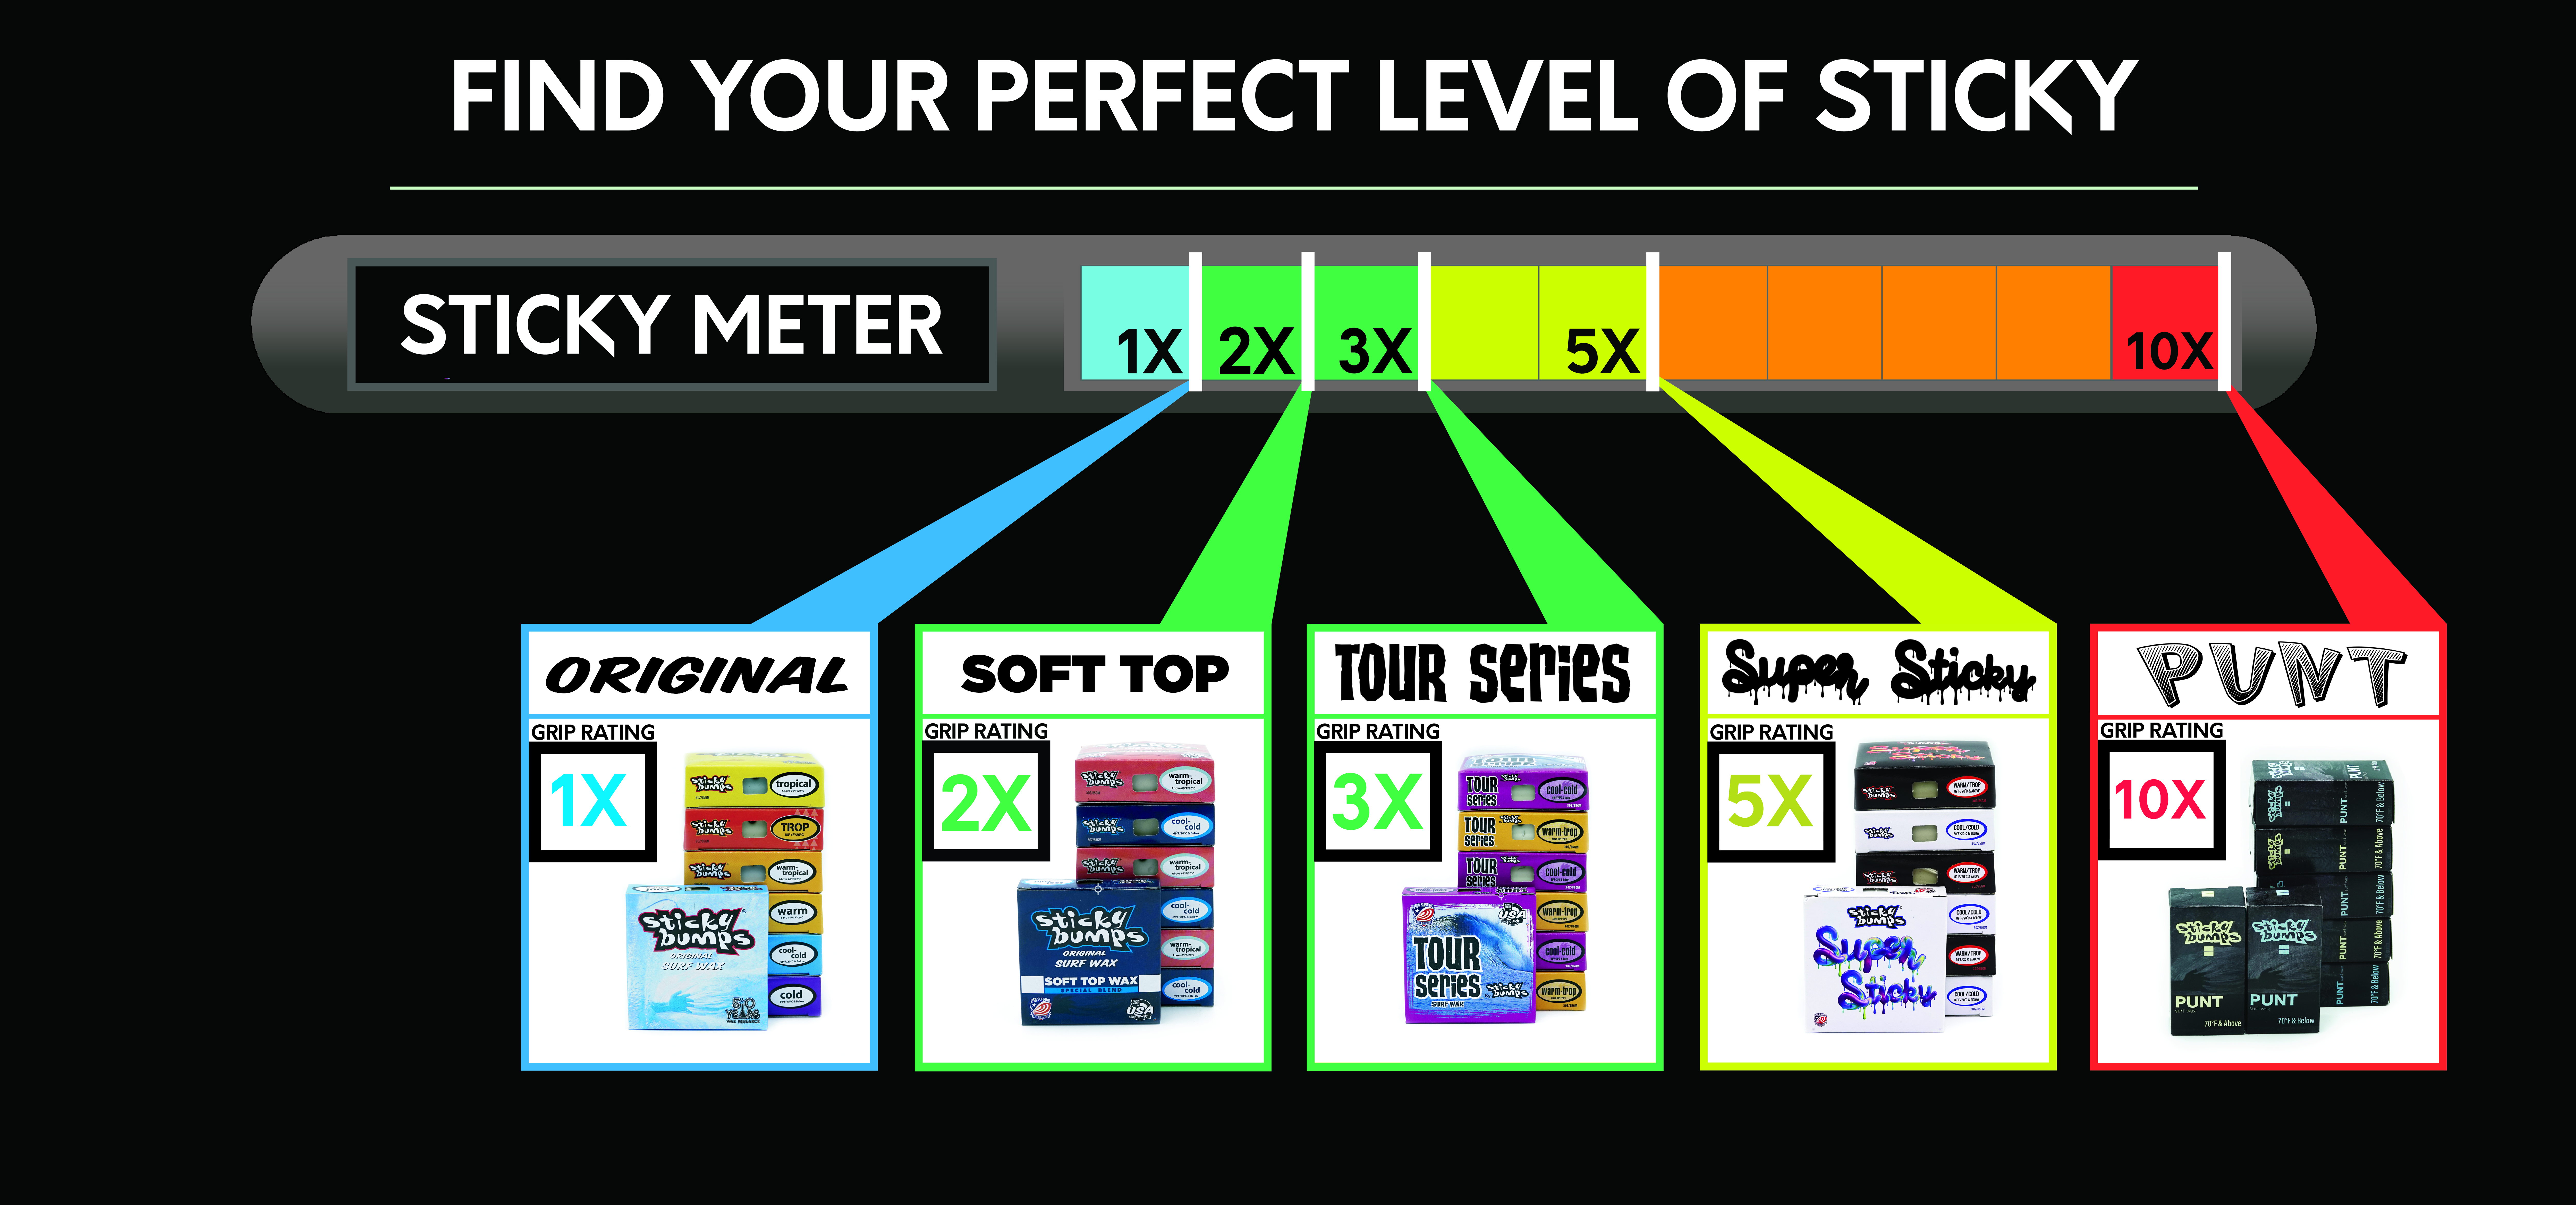 Our Sticky Meter helps you find the wax with your perfect level of sticky. All of our wax lines are organized on the Sticky Meter  in ascending order from least sticky to stickiest, starting with with our Original Formulas with a grip rating of 1 X, followed by our Soft Top waxes with a grip rating of 2 X, then our Tour Series at 3 X, then Super Sticky 5 X, and finally Punt with our stickiest grip rating of 10 X. 